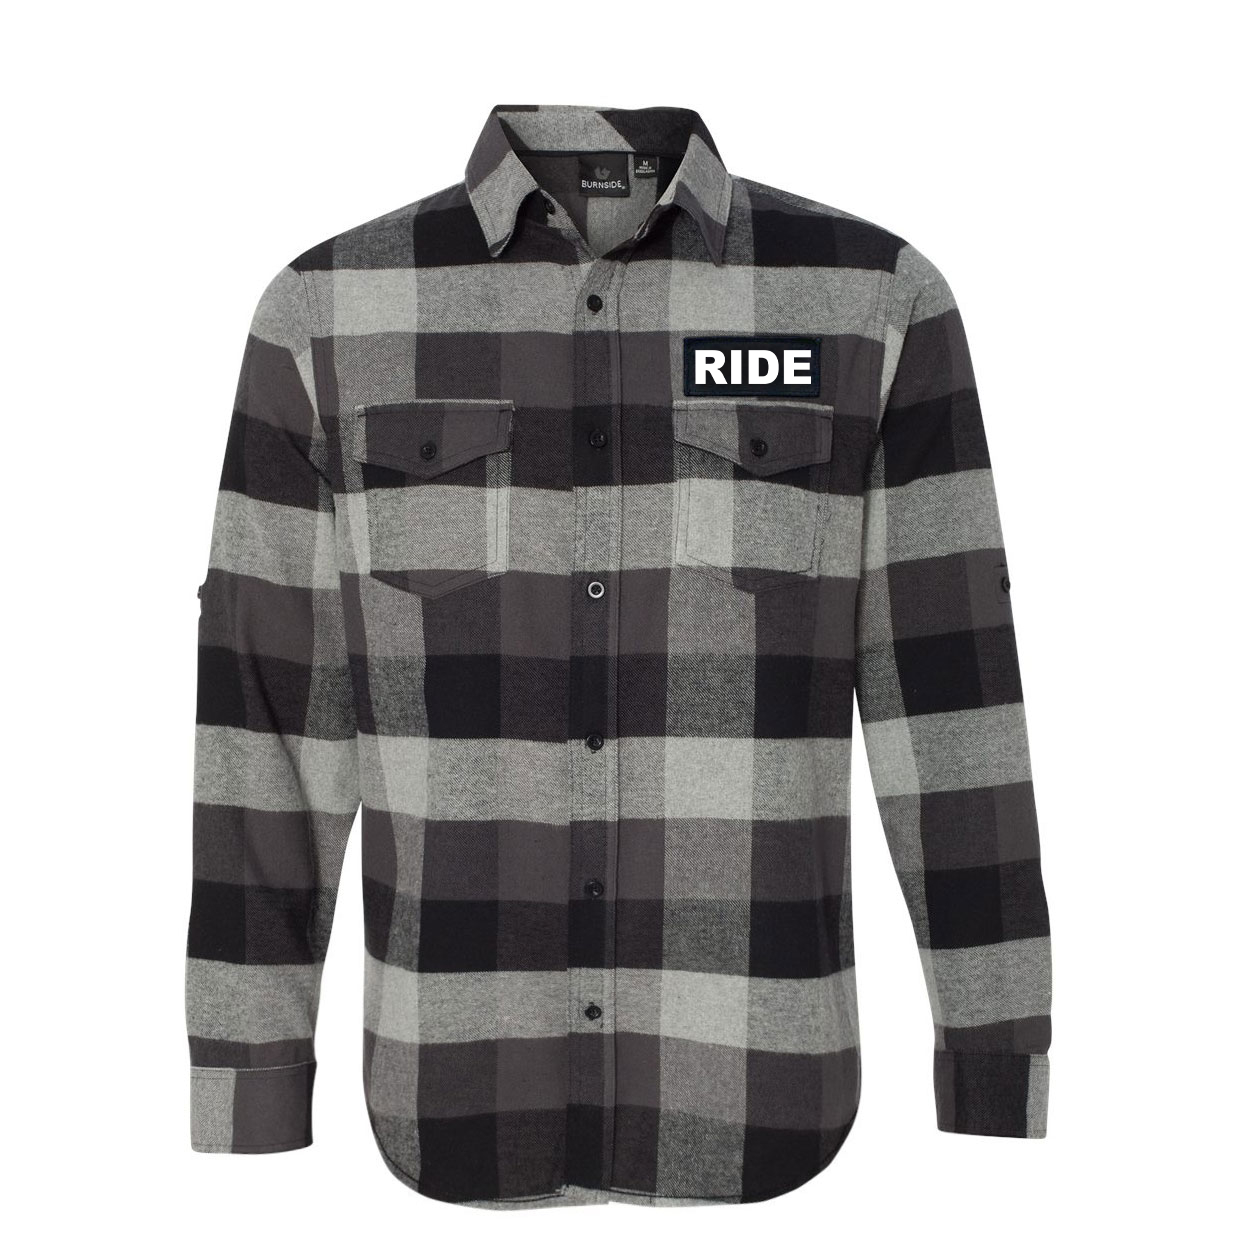 Ride Brand Logo Classic Unisex Woven Patch Quilted Button Flannel Jacket Gray/White (White Logo)